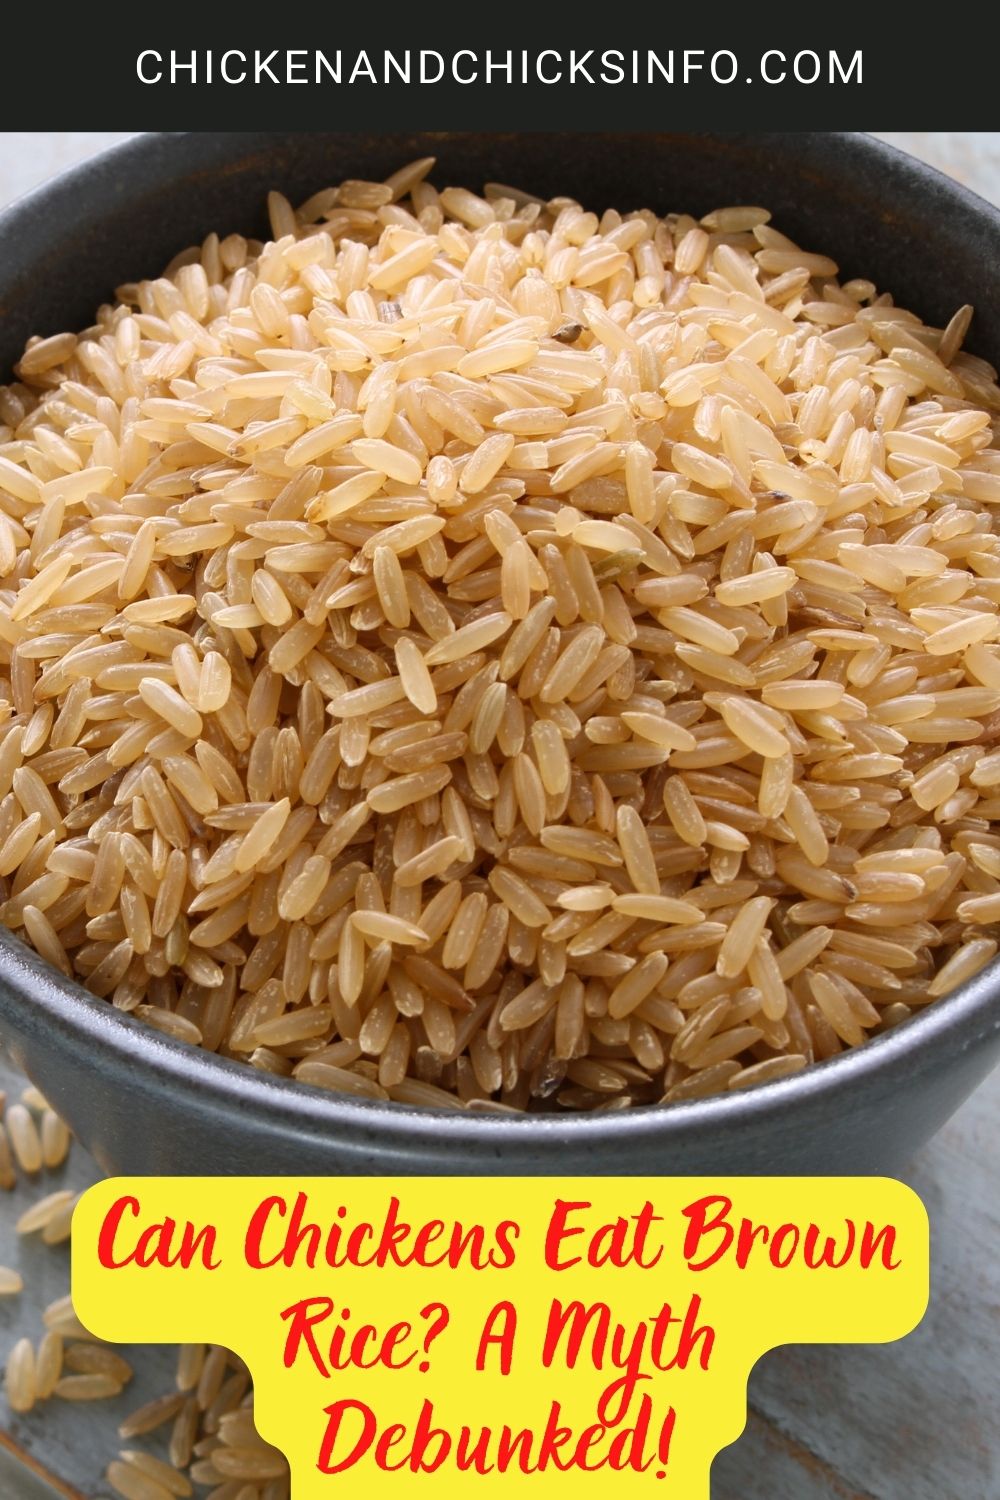 Can Chickens Eat Brown Rice? A Myth Debunked! poster.
